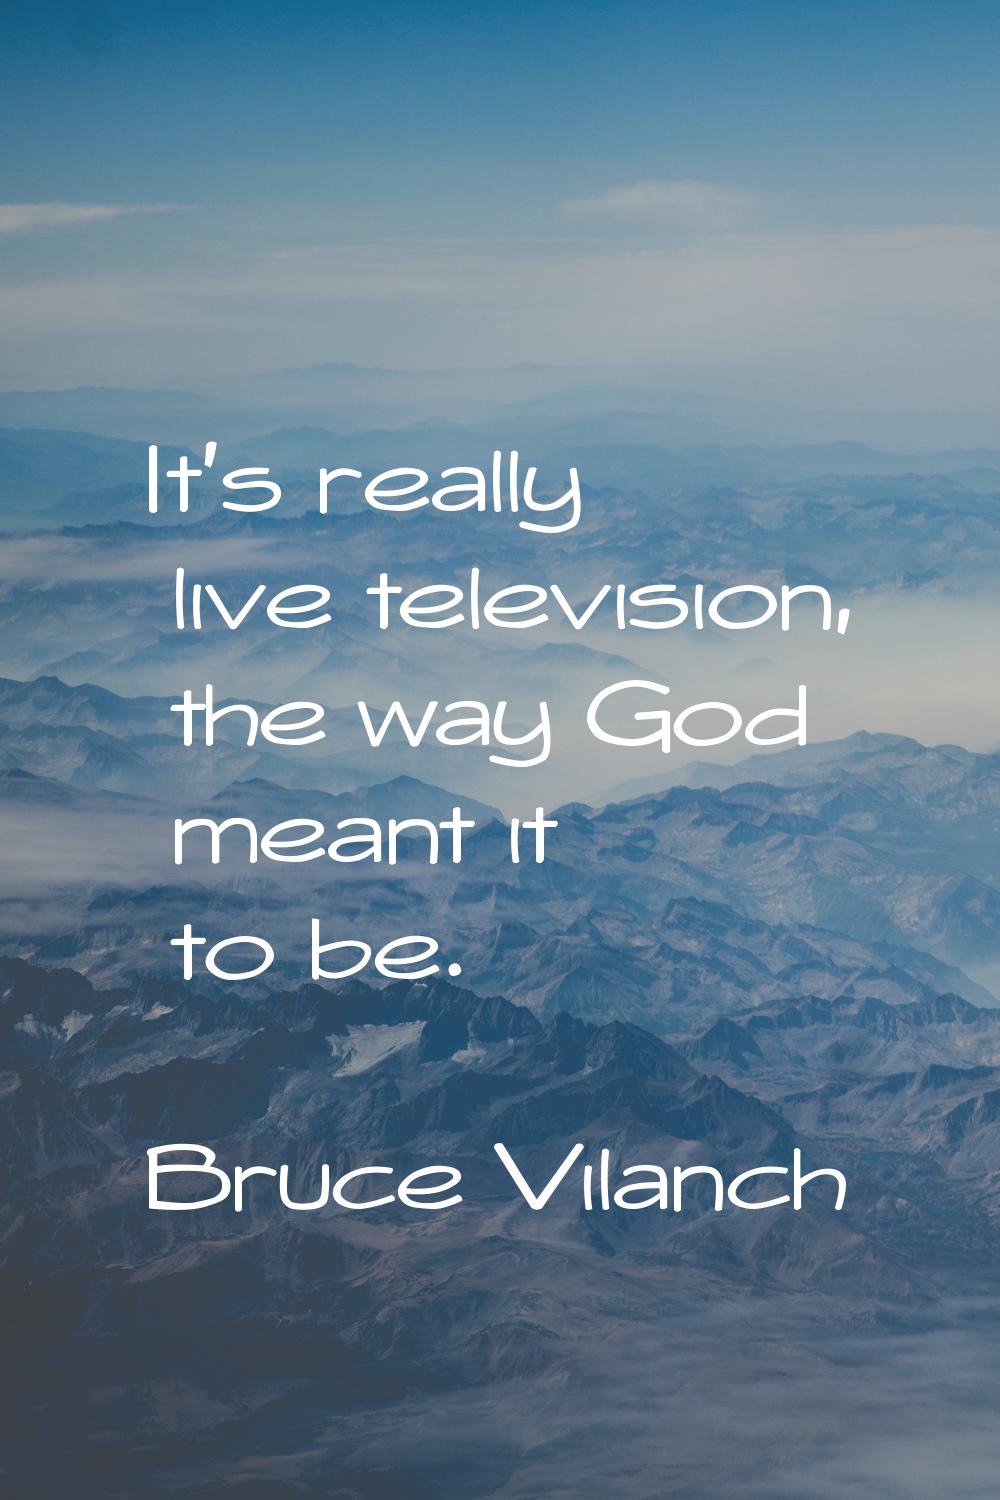 It's really live television, the way God meant it to be.